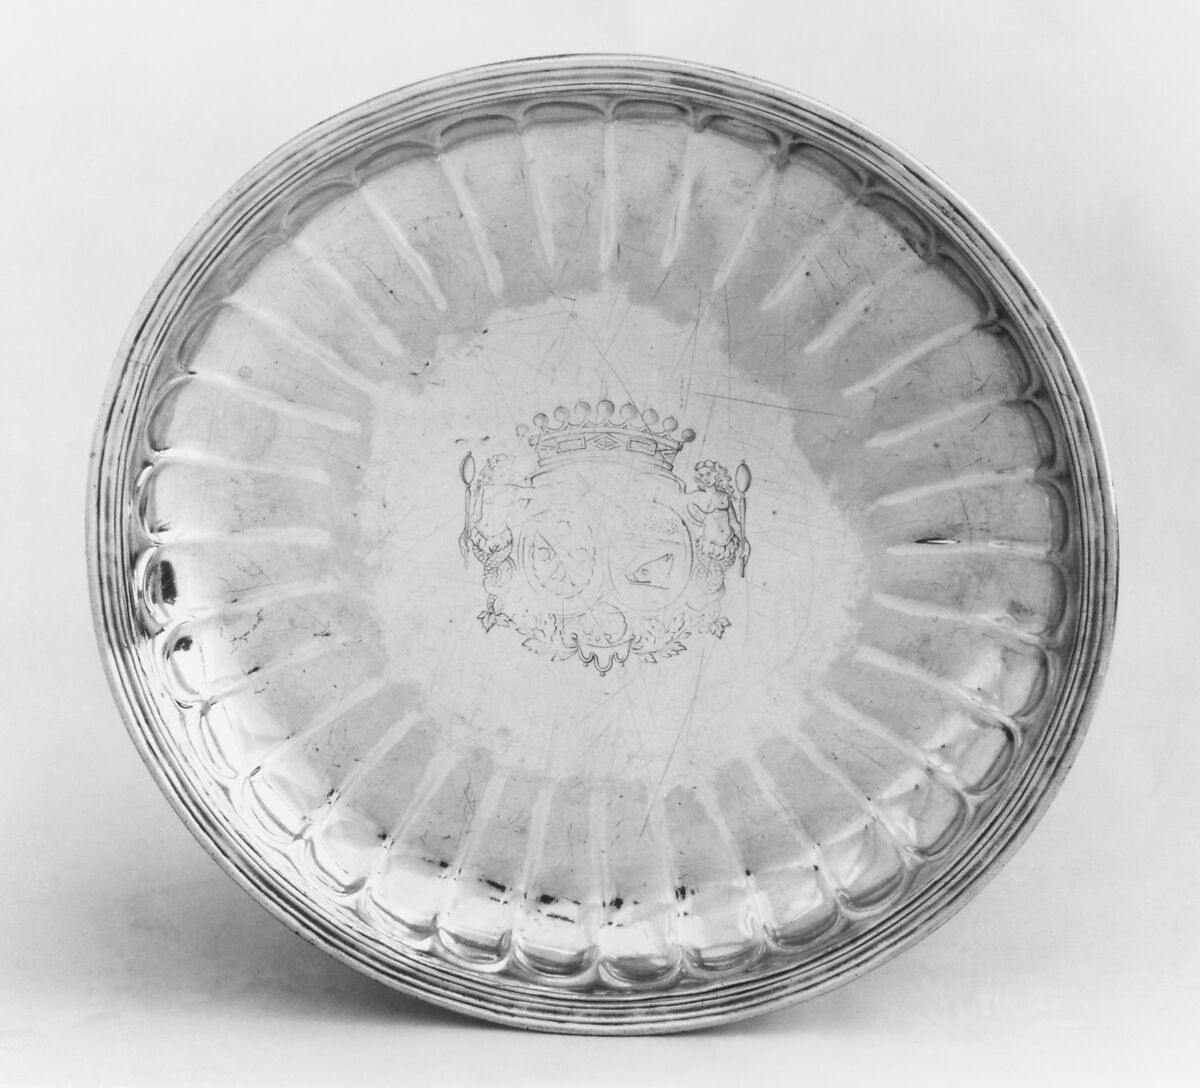 Dish, Possibly Pierre II Demange (master 1723, active 1781), Silver, French, Poitiers 